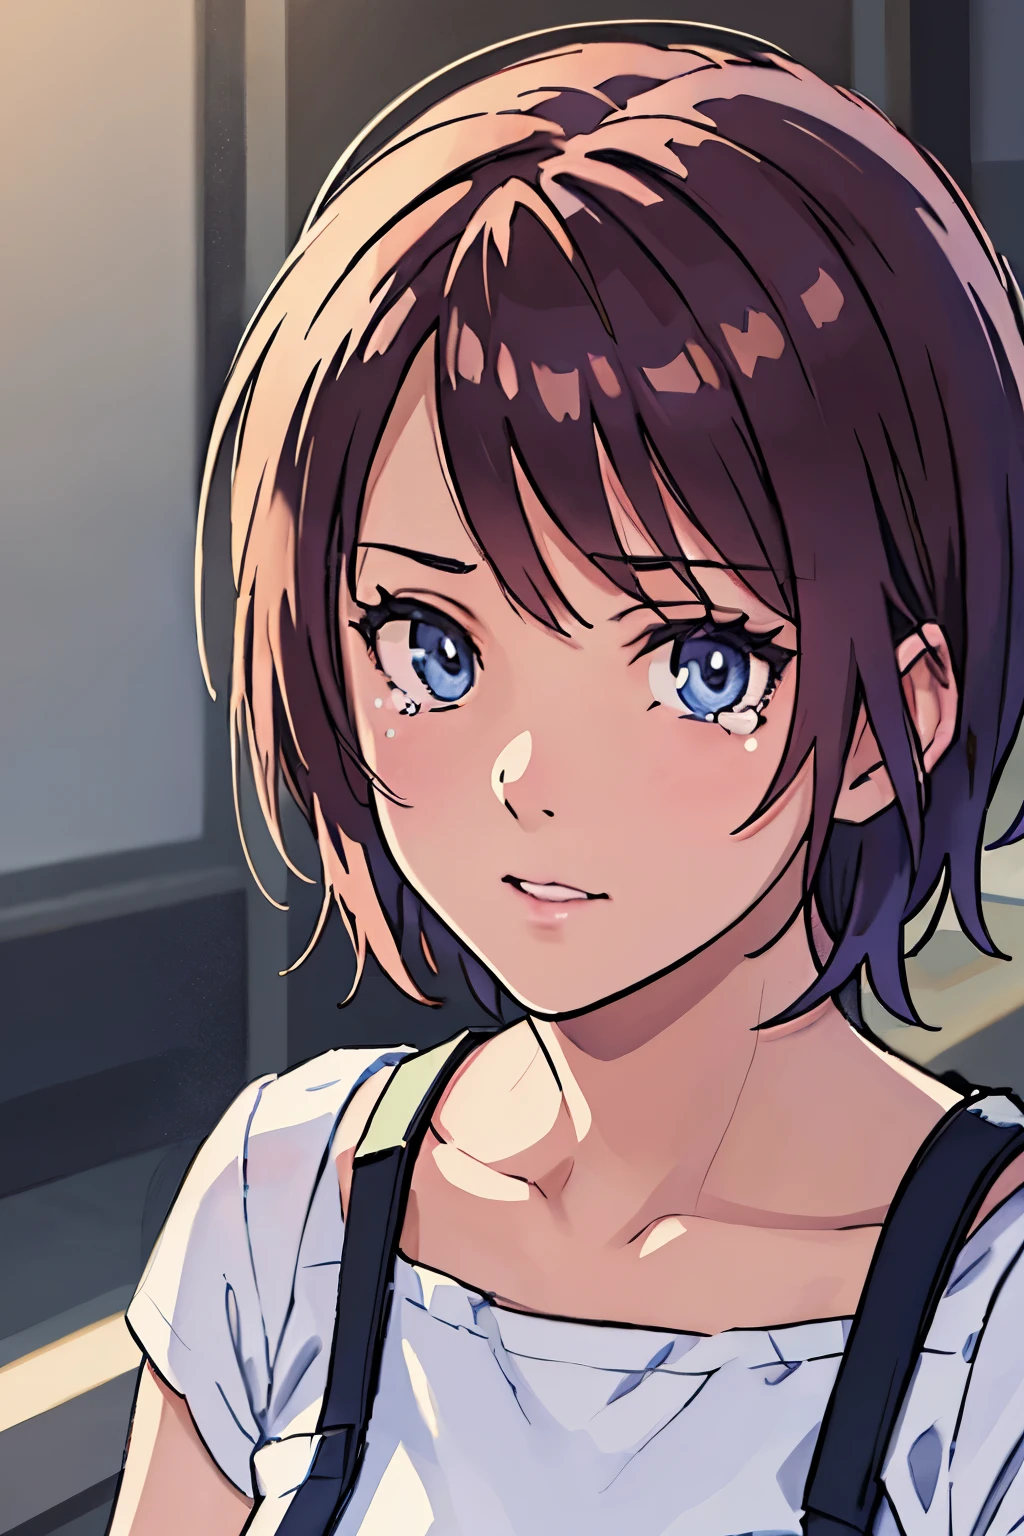 (highest quality,4K,8k,High resolution,Tabletop:1.2), Very detailed, (Realistic,photoRealistic,photo-Realistic:1.37),((portrait)),Shorthair girl, heartbroken,sad,tearful,cry,teardrops,She is in uniform,Beautiful and beautiful eyes, Beautiful lip detail, Very detailed eyes and face,Long eyelashes, Realistic anime 3D style, Smooth anime CG art, Digital rendering by Makoto Shinkai, Moe anime art style, photoRealistic rendering of an anime girl, Shinkai Makoto style, Cute anime girl visuals, Realistic young anime girl, Girl Fanart, Works by anime artists&#39;Studio.